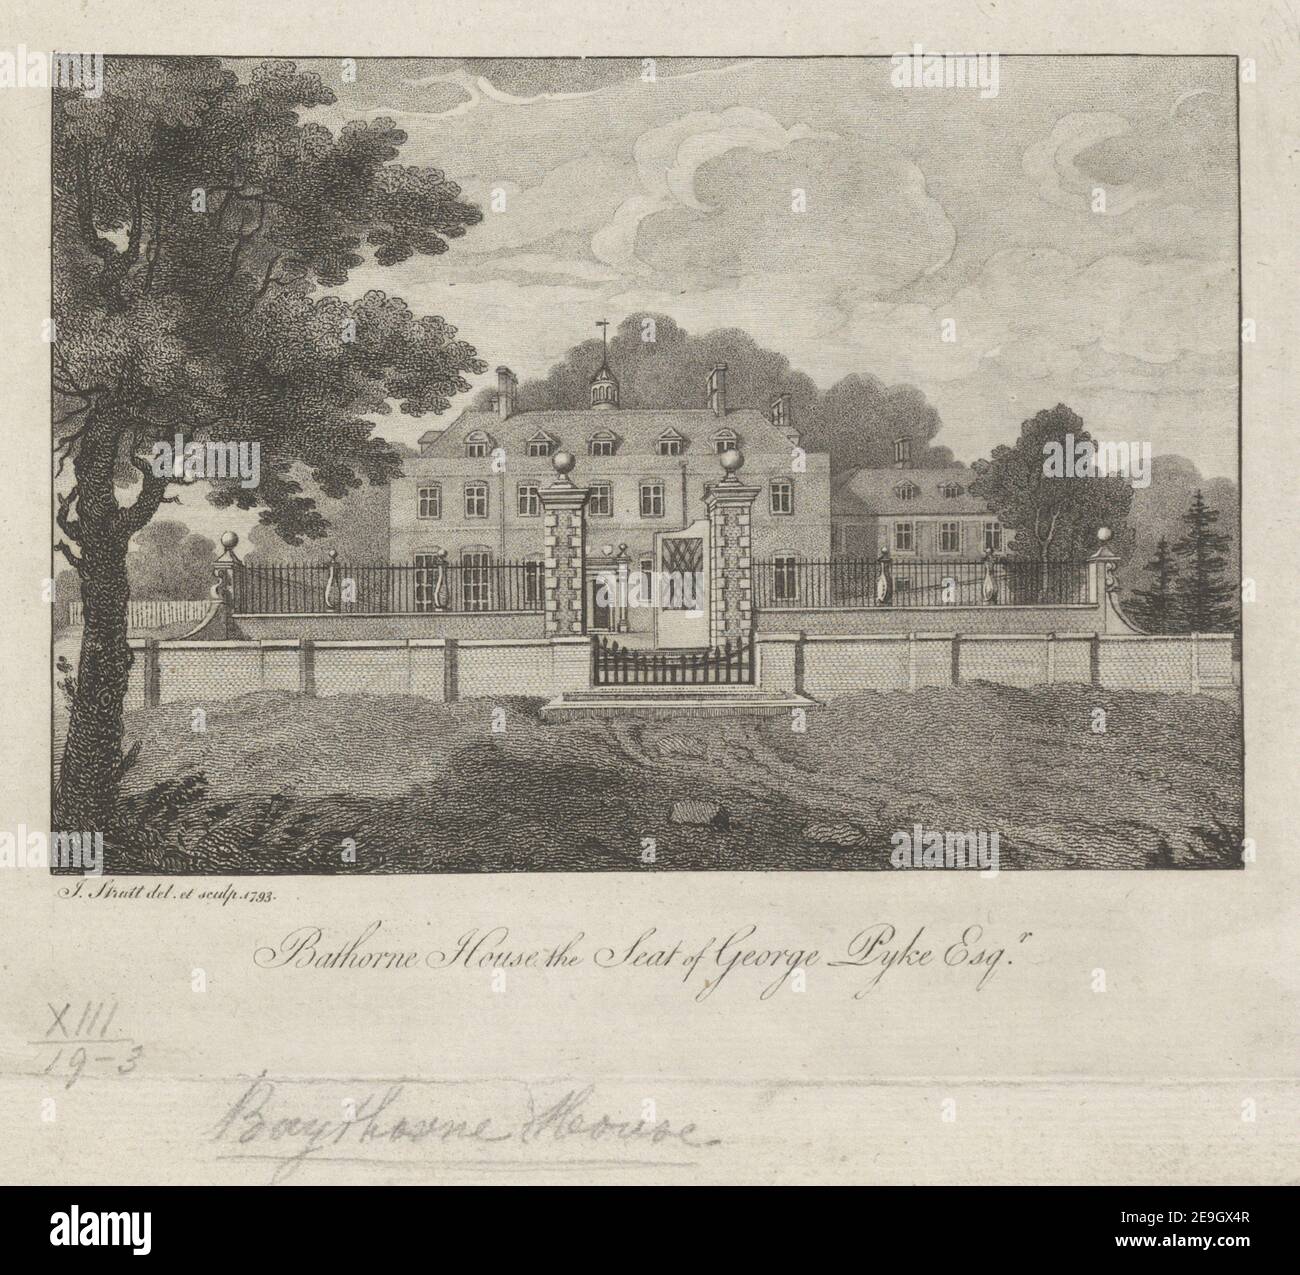 Bathorne House, the Seat of George Pyke Esq.r  Author  Strutt, Joseph 13.19.3. Place of publication: [London] Publisher: [unknown publisher]., Date of publication: [1793.]  Item type: 1 print Medium: etching and aquatint Dimensions: platemark 16.4 x 20.4 cm  Former owner: George III, King of Great Britain, 1738-1820 Stock Photo